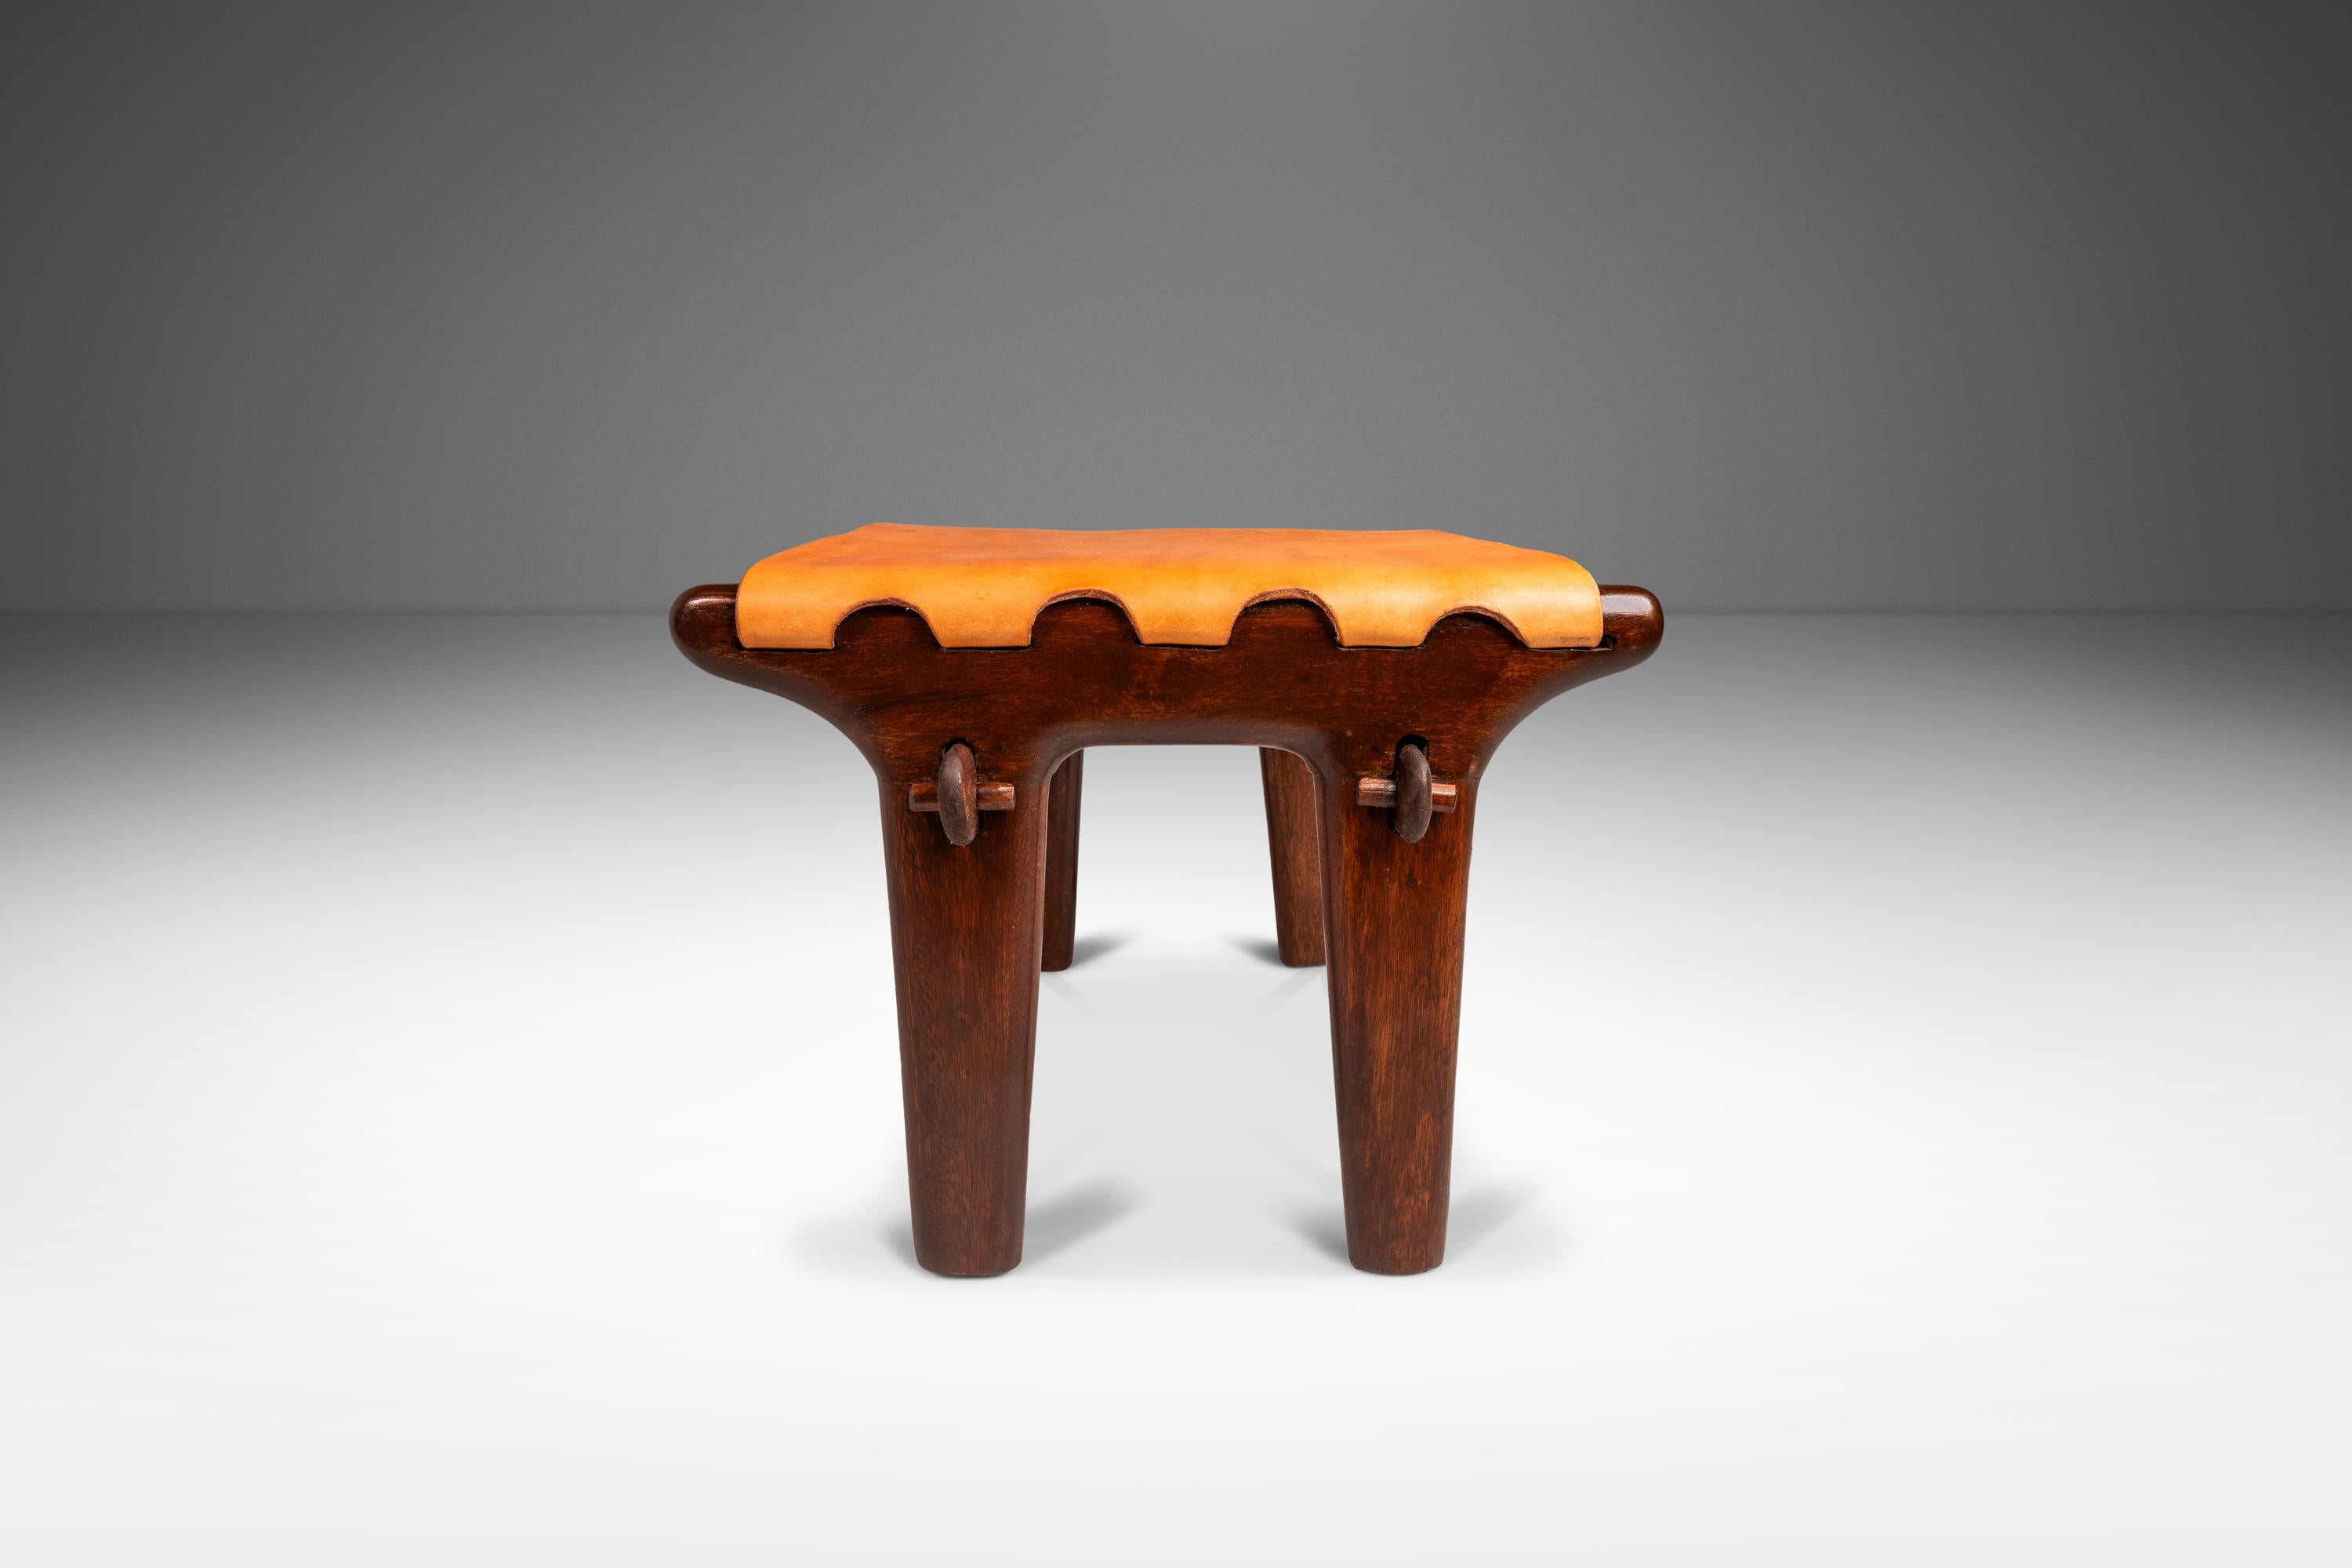 Introducing a rare sling stool by the incomparable Angel Pazmino. Recently and painstakingly restored by our team of craftsmen this iconic ottoman has a new lease on life and we love the results. The solid jacaranda wood frame has been hand-sanded